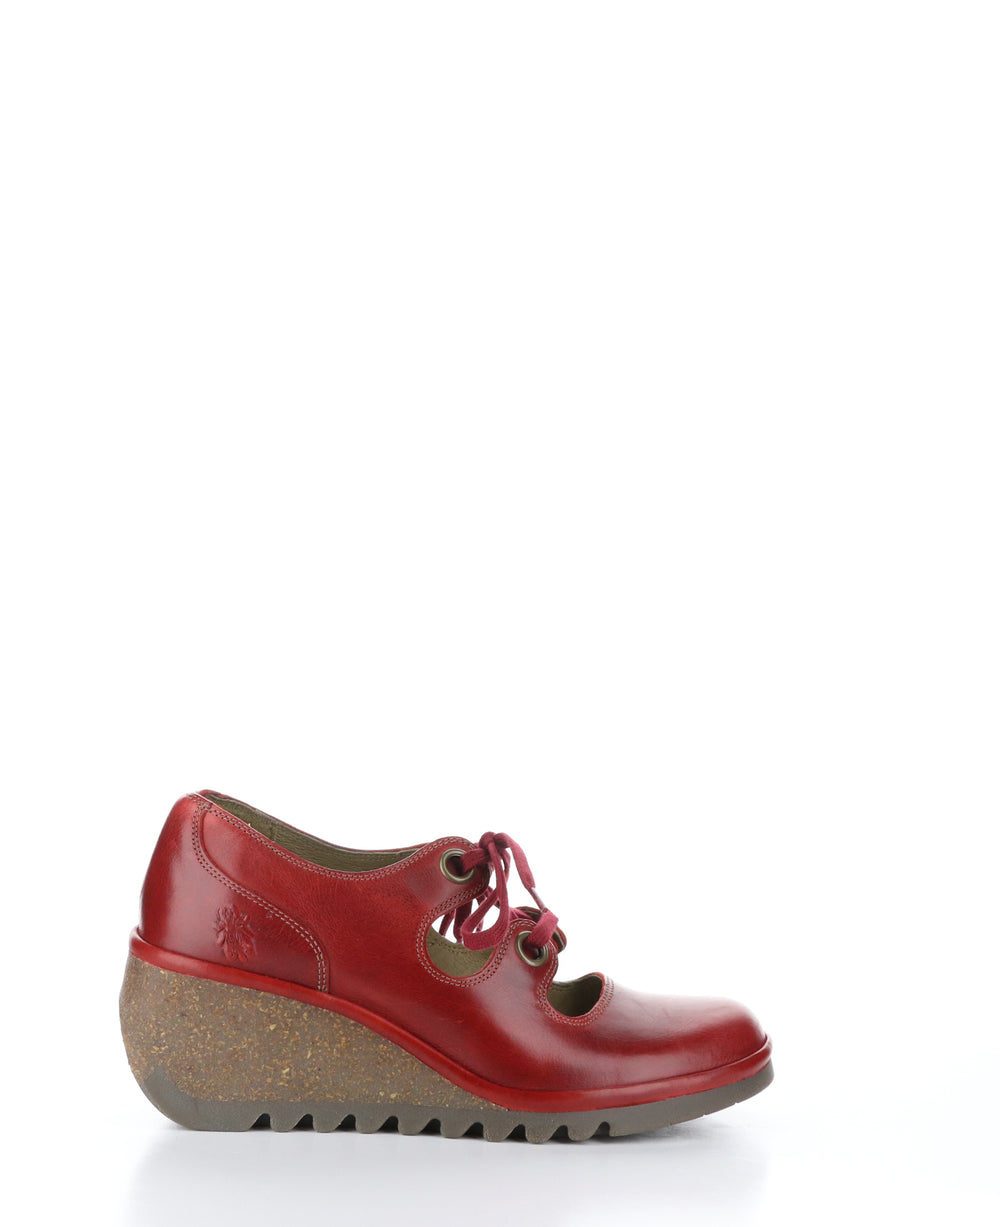 NELY337FLY Red Round Toe Shoes